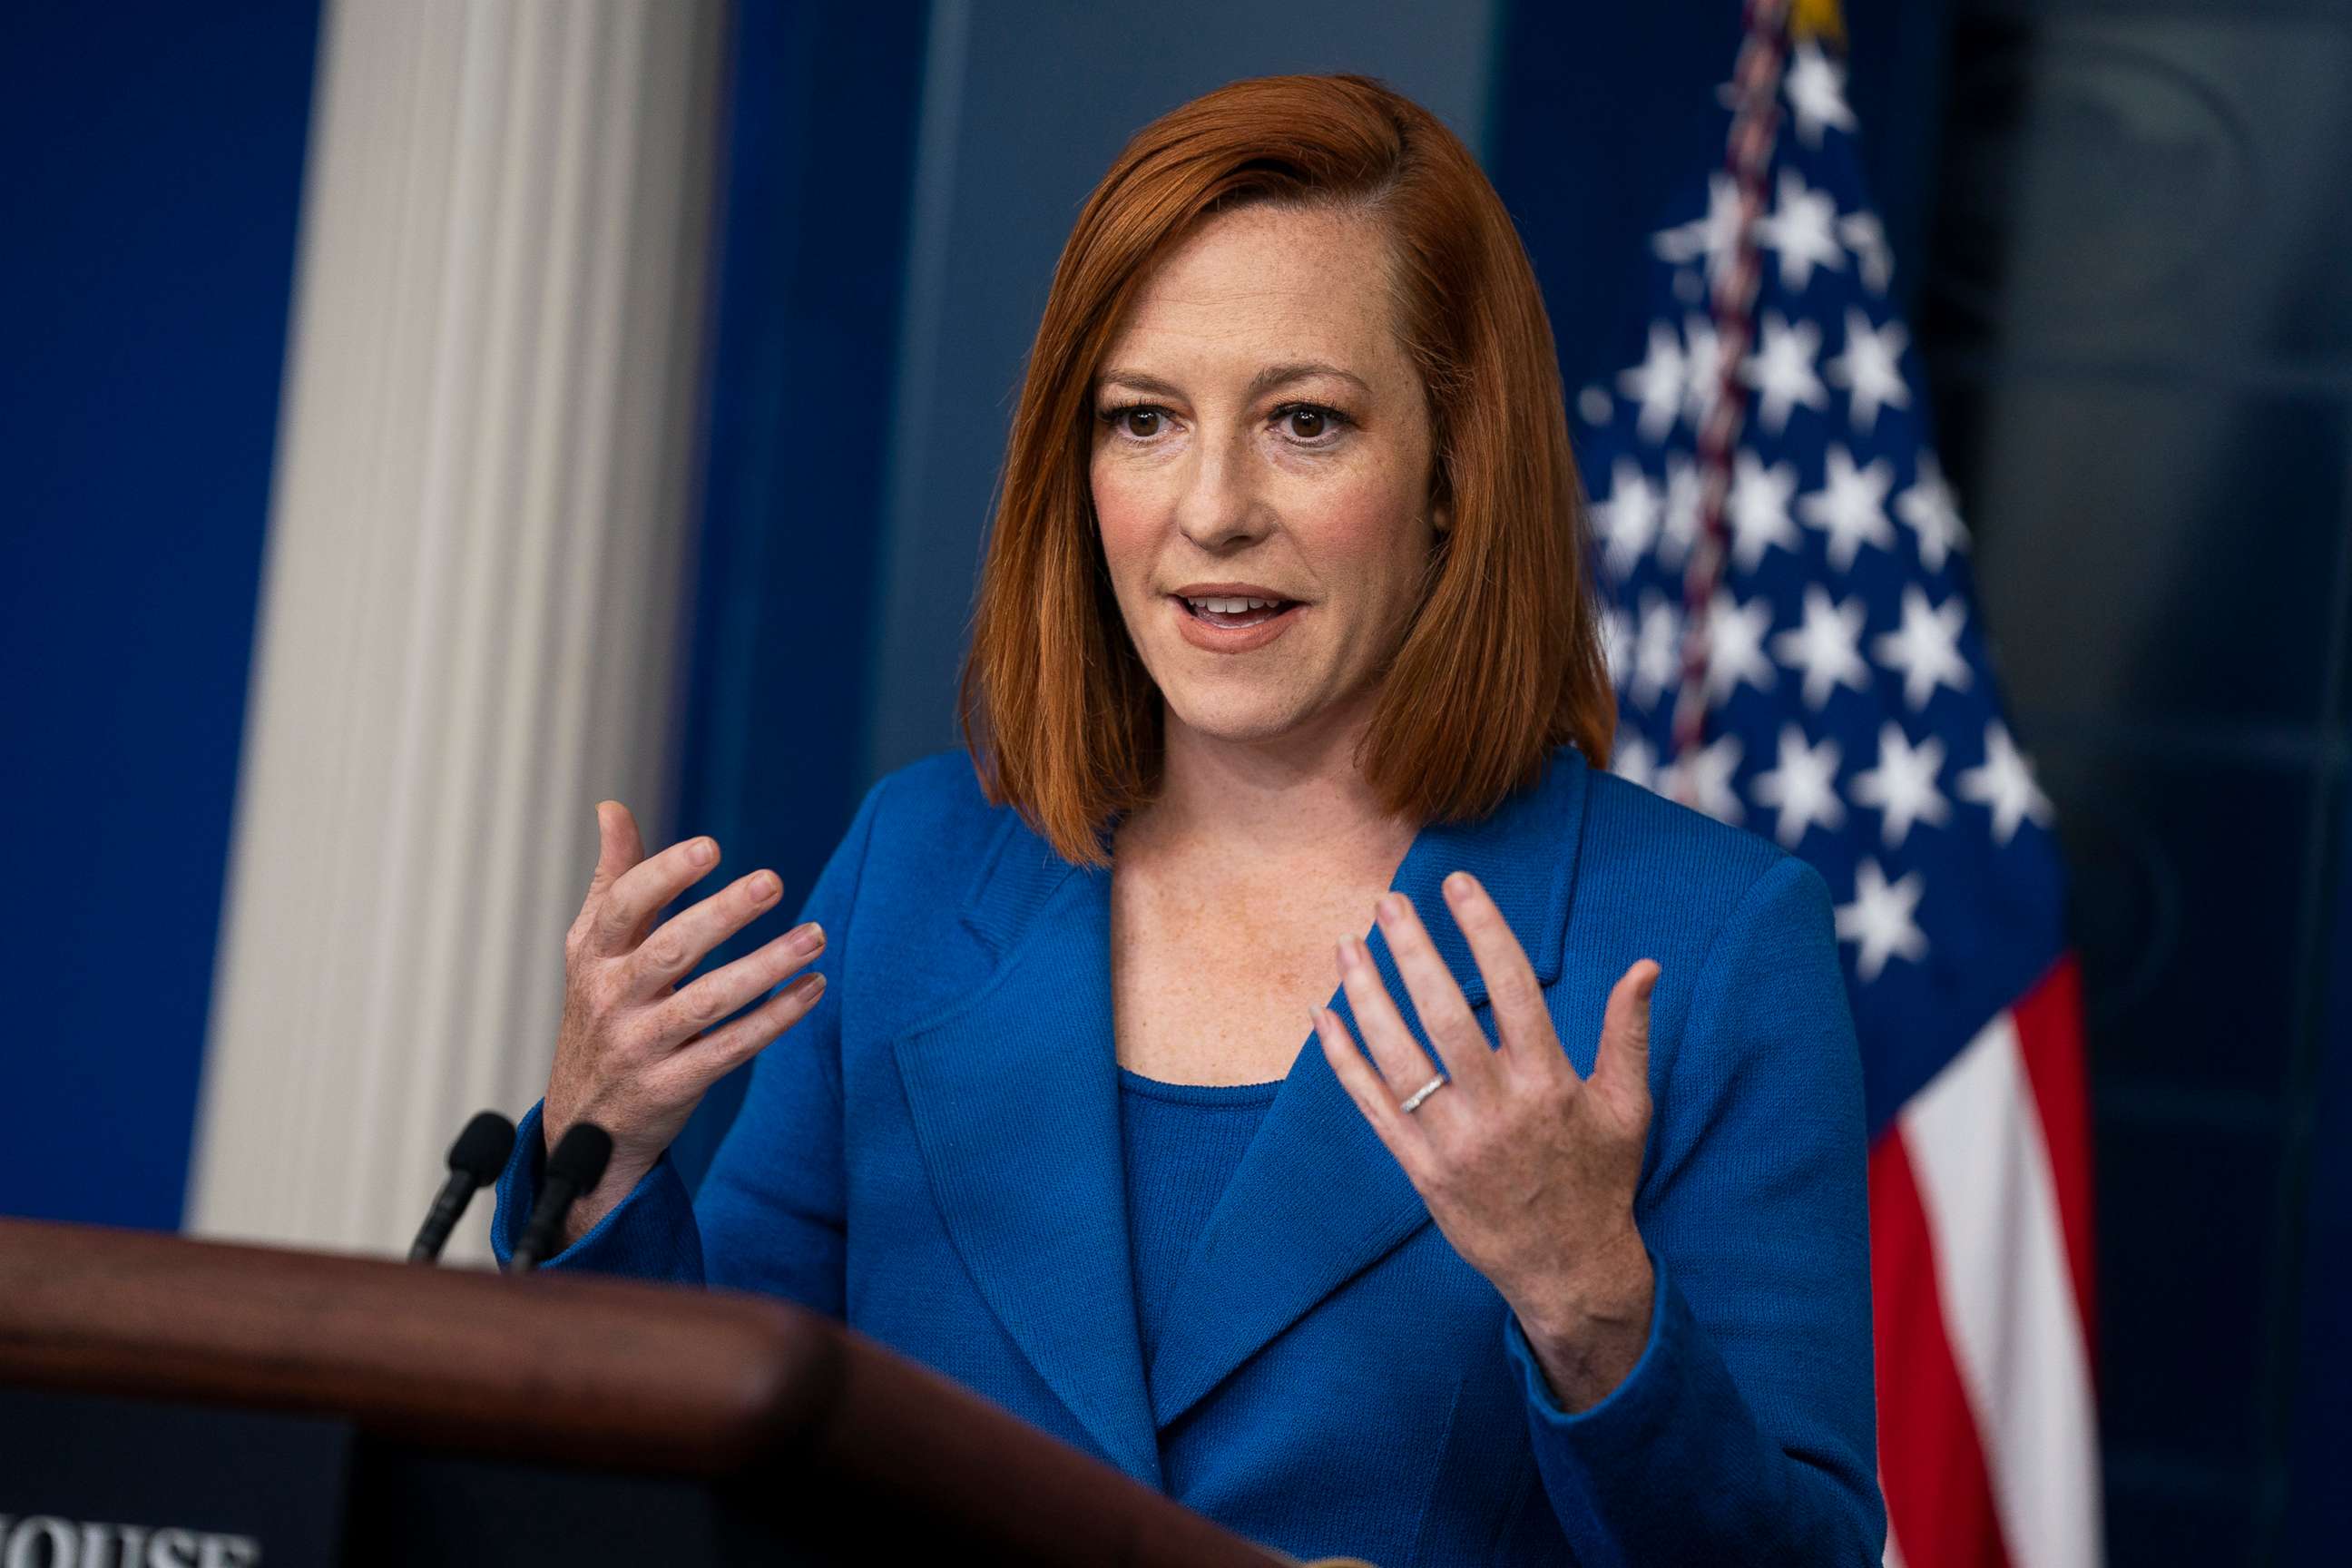 PHOTO: White House press secretary Jen Psaki speaks during a press briefing at the White House, May 24, 2021, in Washington.